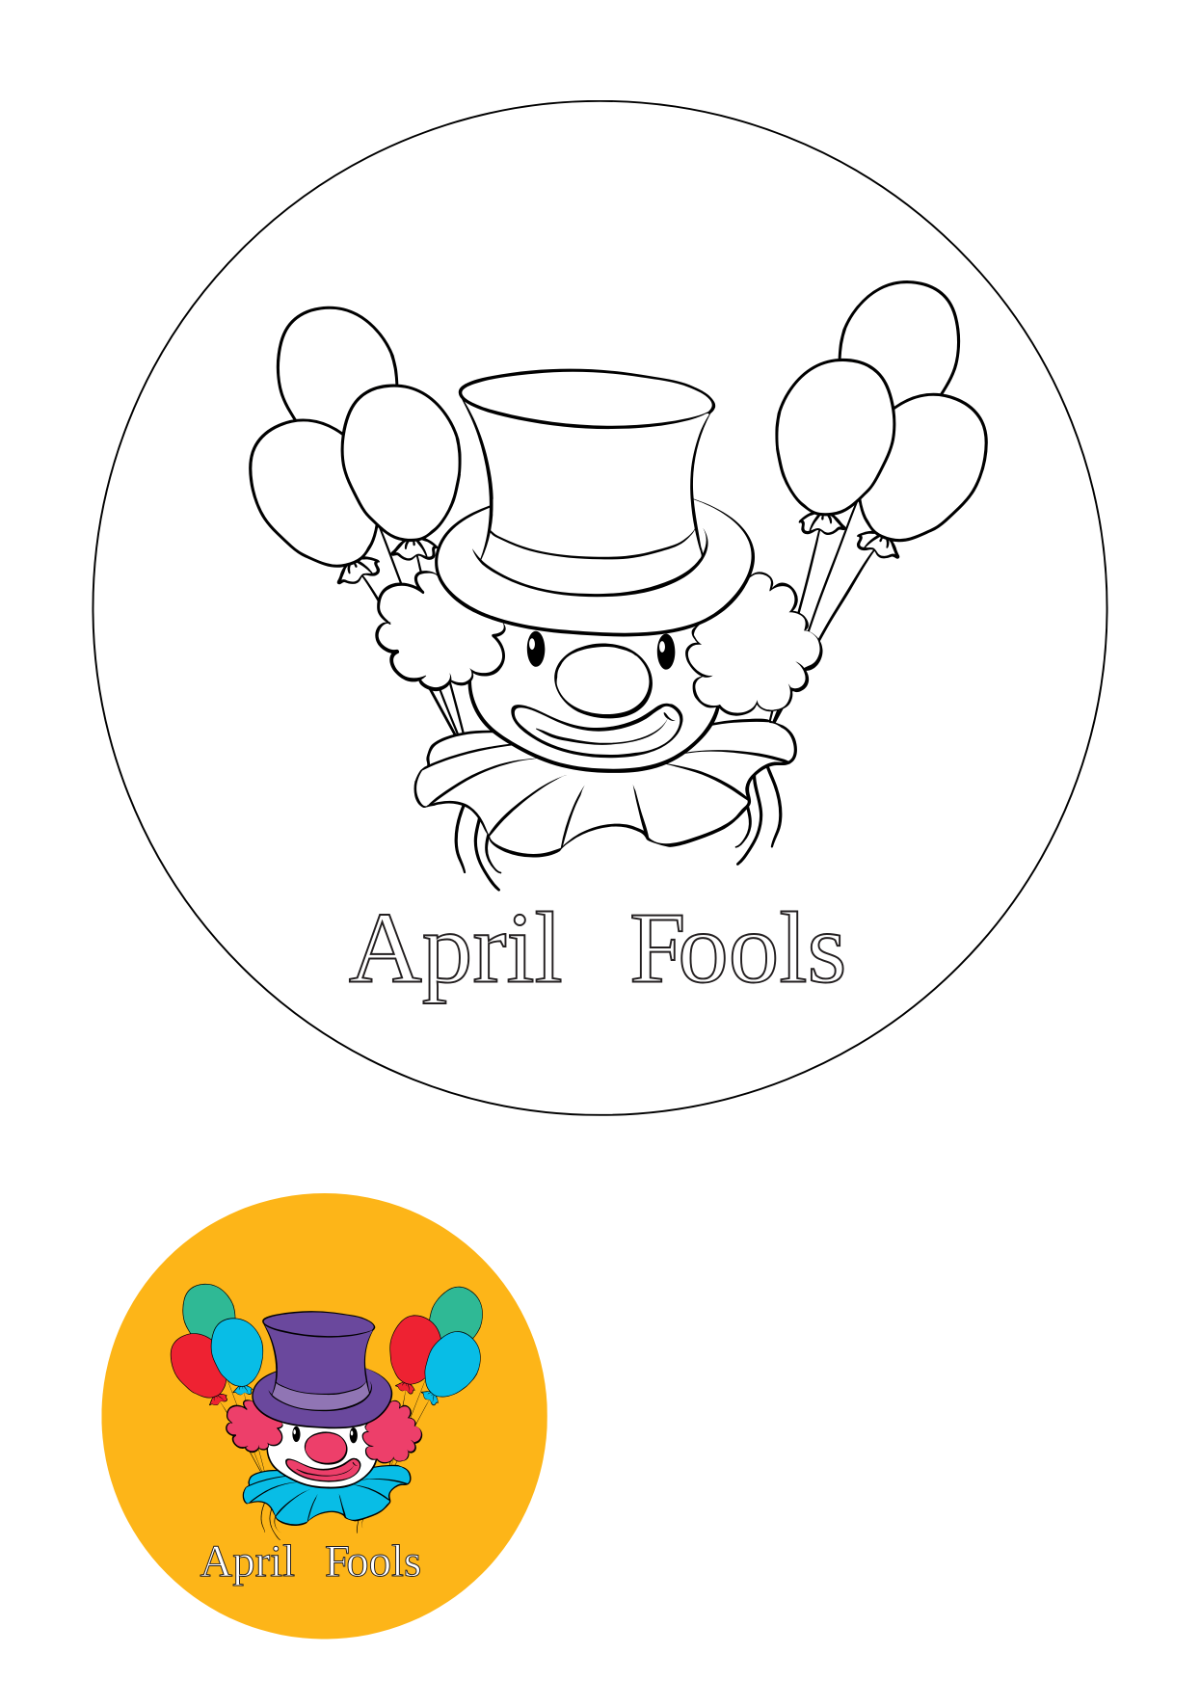 Free April Fools’ Day Coloring Page for kids Template